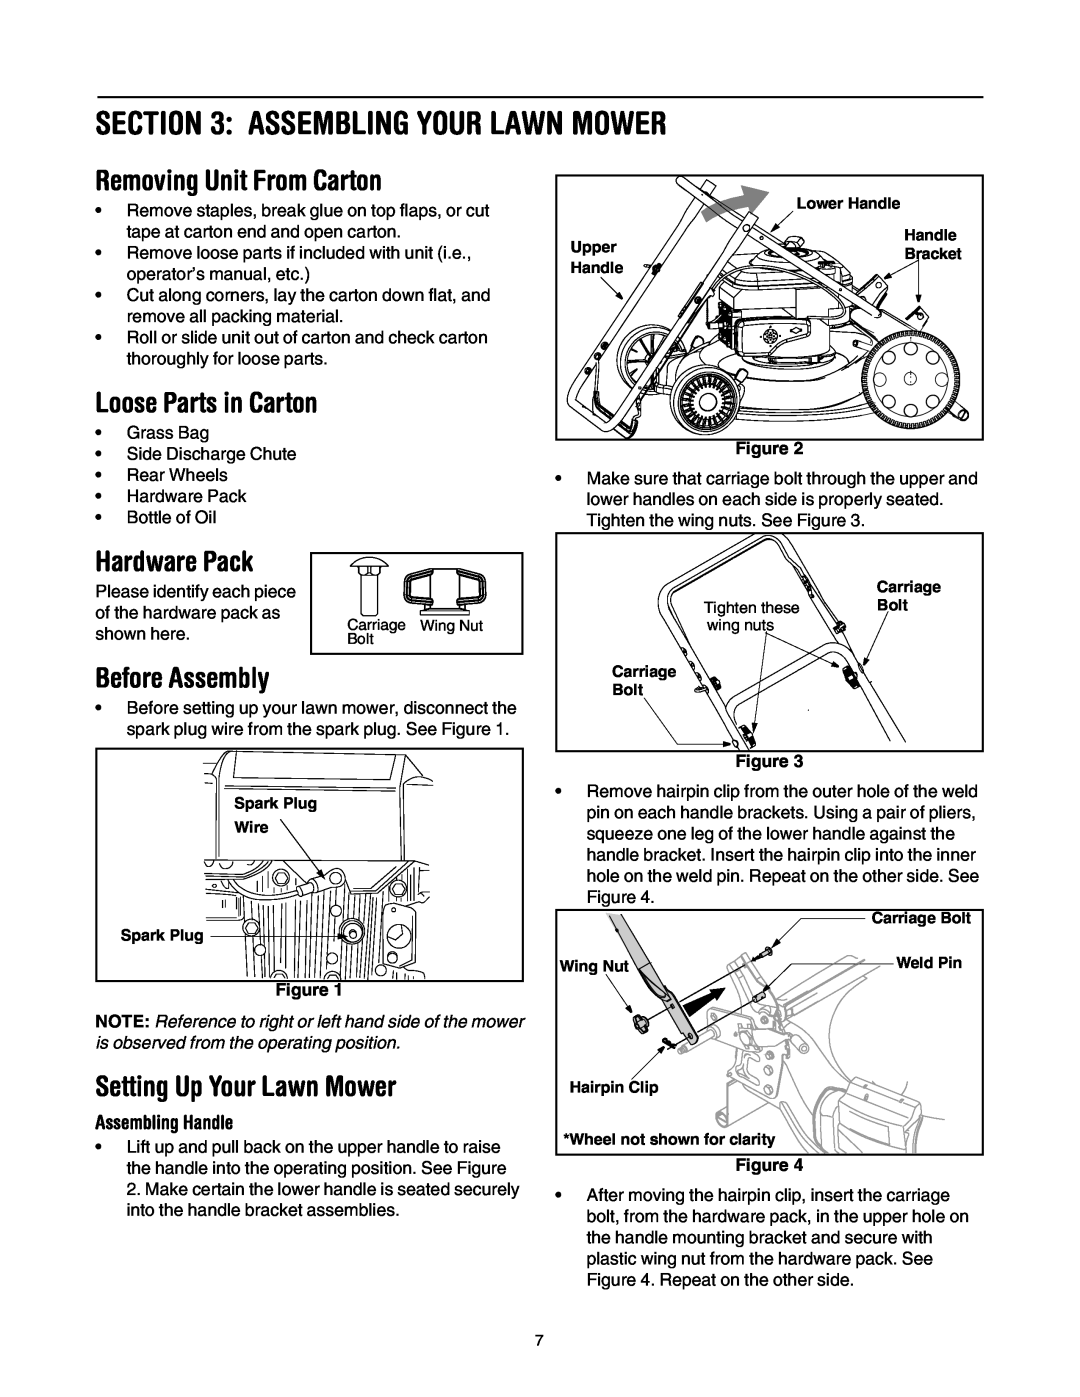 Troy-Bilt 549 Assembling Your Lawn Mower, Removing Unit From Carton, Hardware Pack, Before Assembly, Assembling Handle 